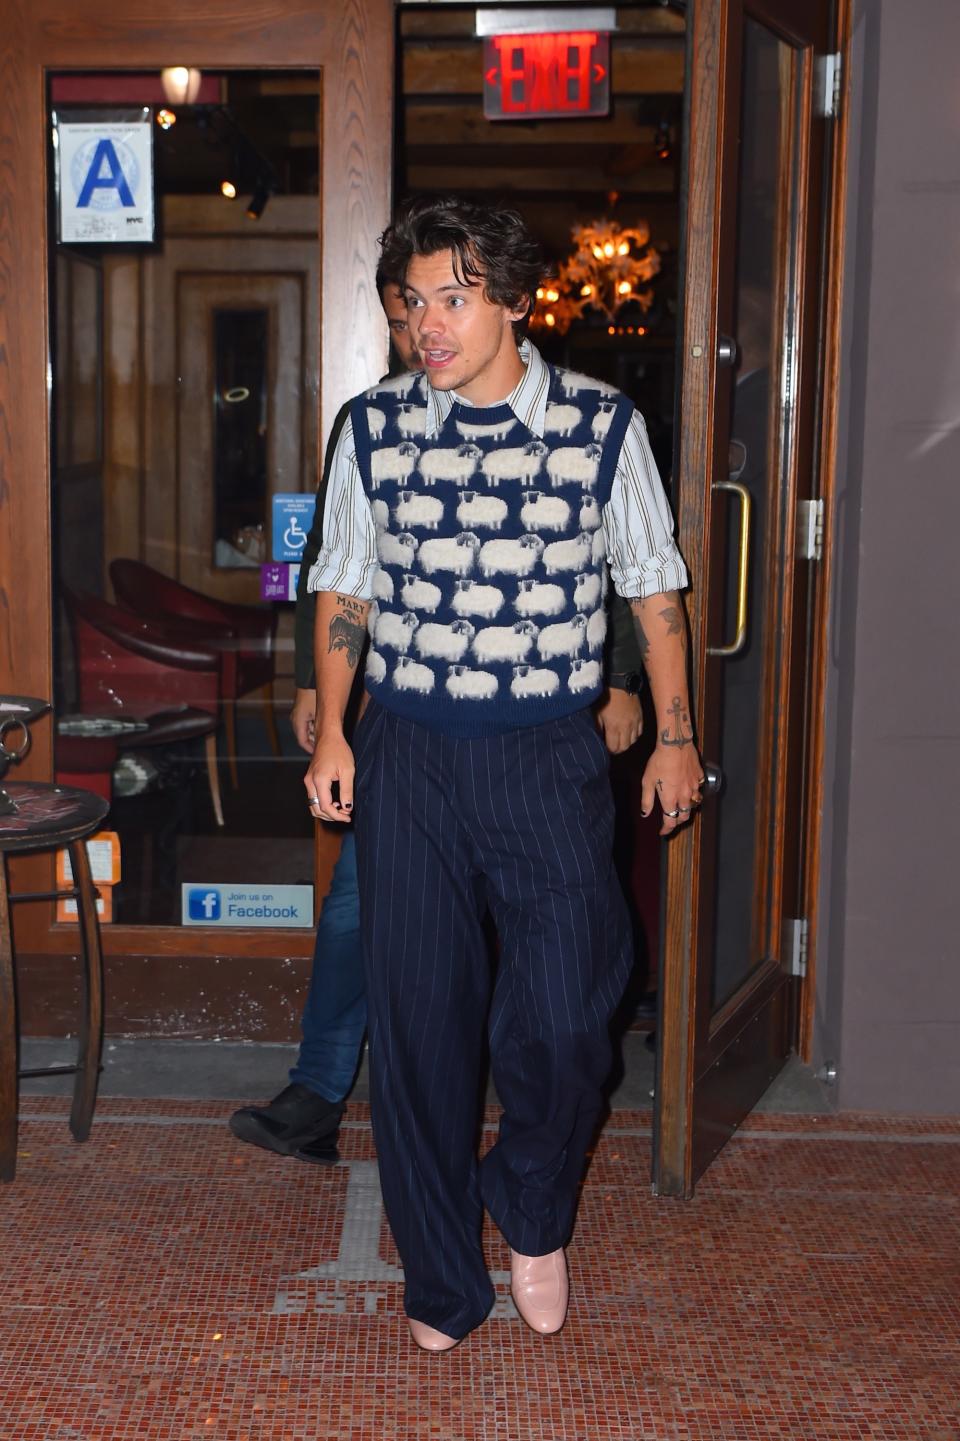 People loved this sweater vest. But it was also crazy that Harry Styles wore these pants.